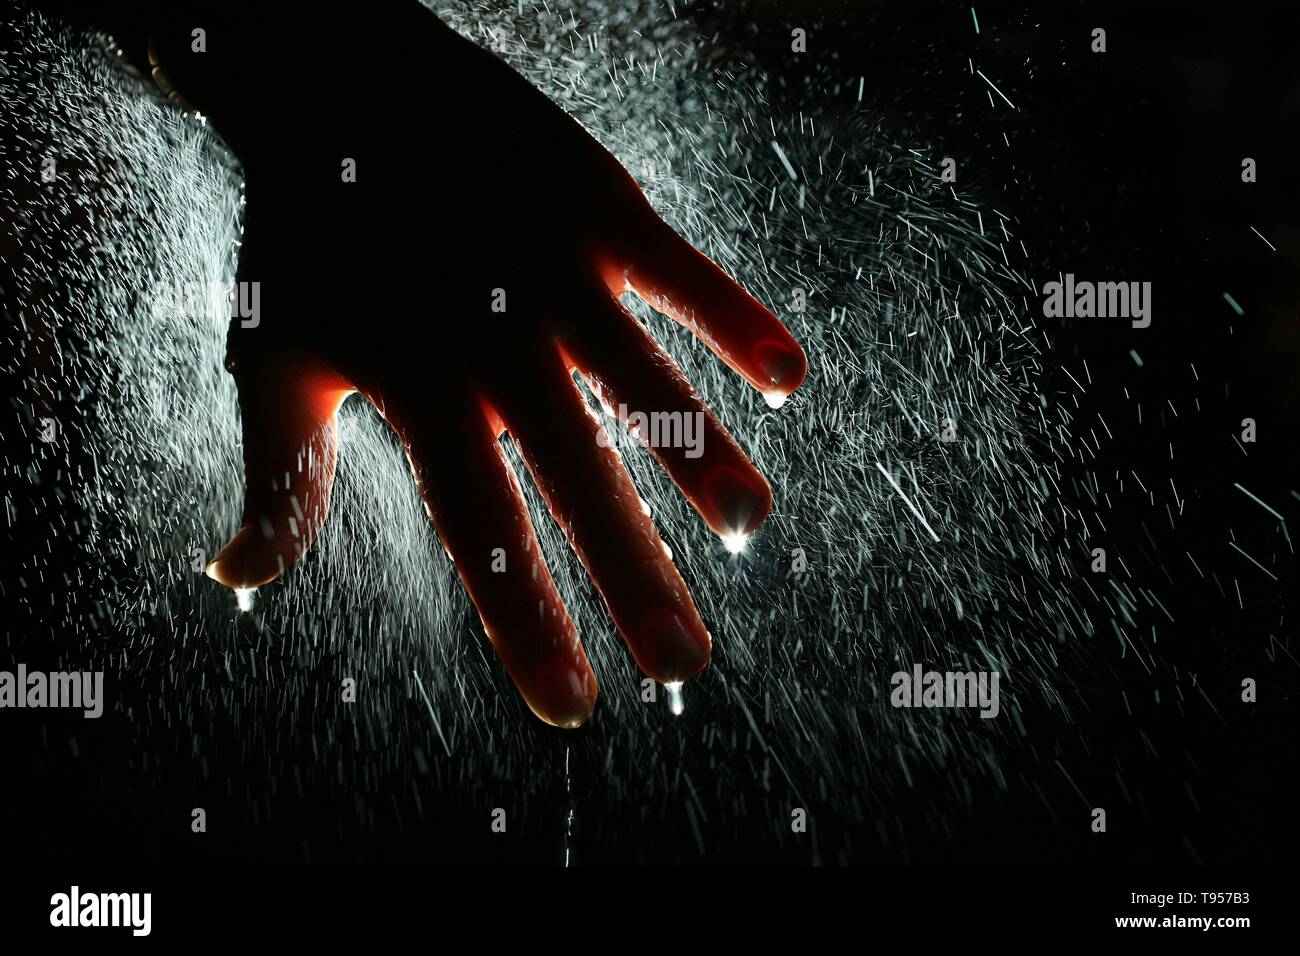 Healing Hand, backlit hand with spread fingers with water mist spray. Stock Photo